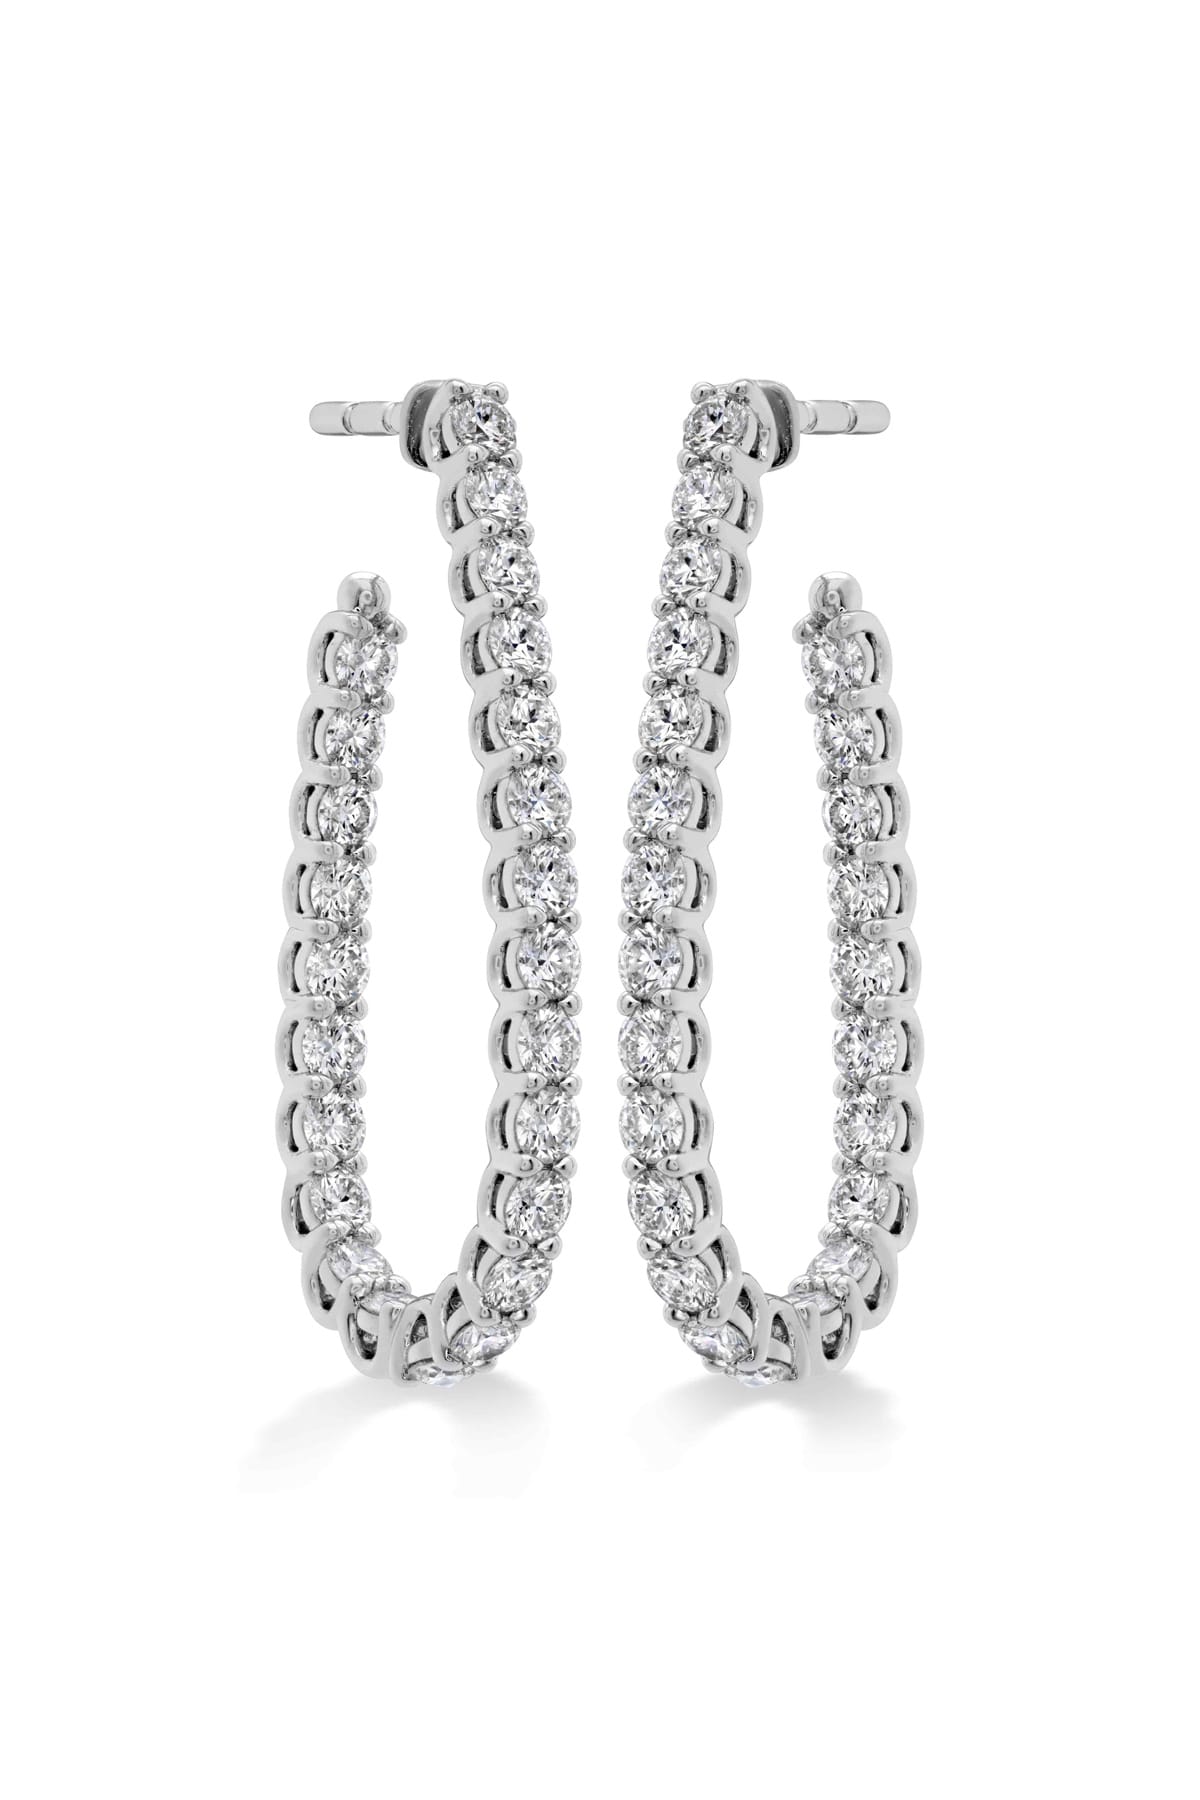 Medium Signature Pear Hoop Earrings From Hearts On Fire available at LeGassick Diamonds and Jewellery Gold Coast, Australia.